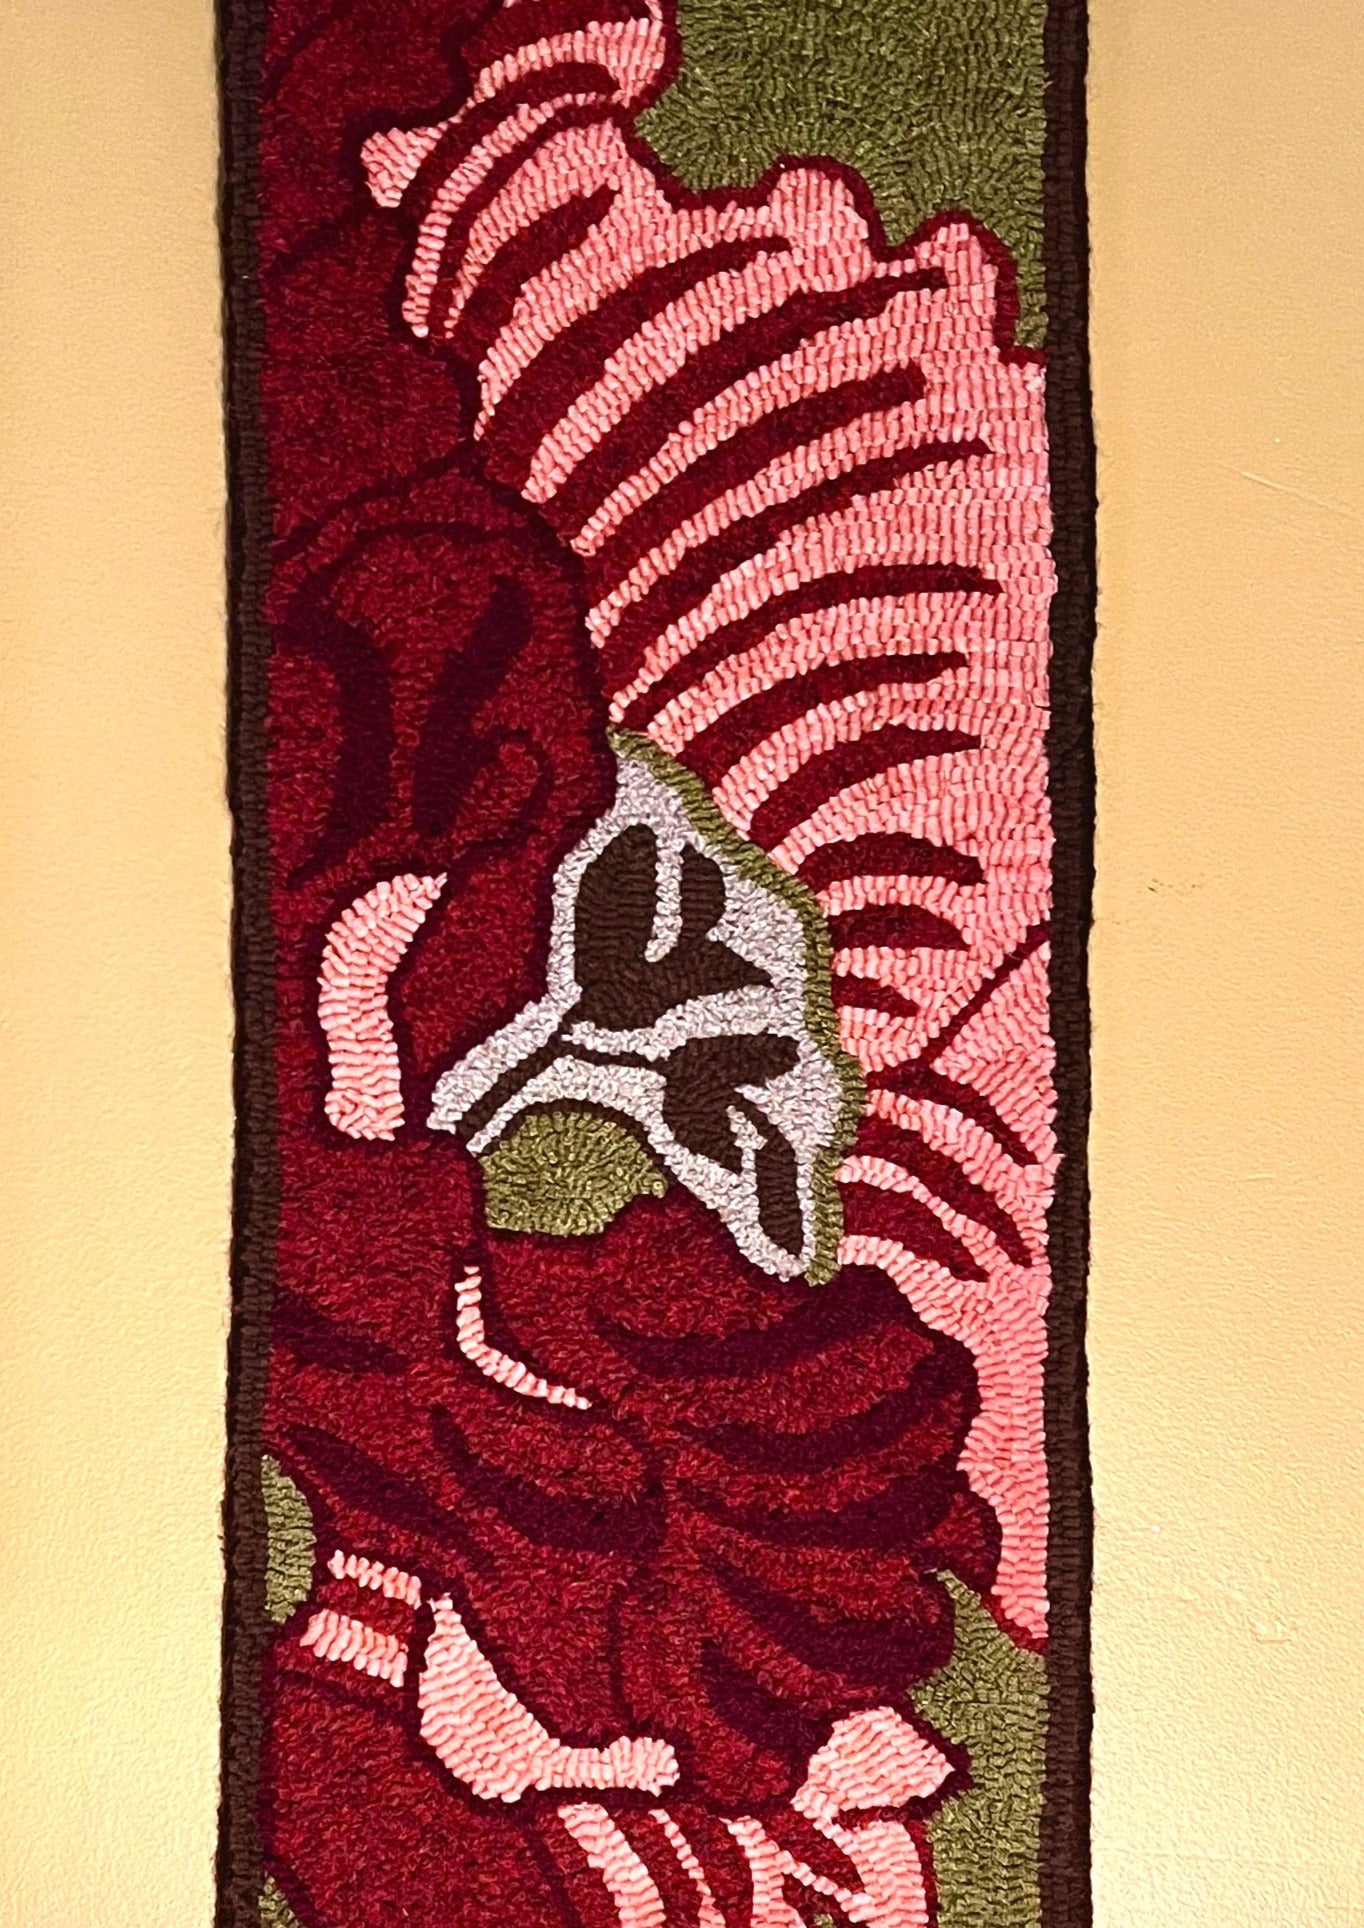  Crimson- Rug Hooking paper pattern by Orphaned Wool Copyright 2023 Kelly Kanyok. This is a Crimson color floral abstract rug hooked wool design. The pattern is designed to be enlarged allowing you to create the size pattern you desire.